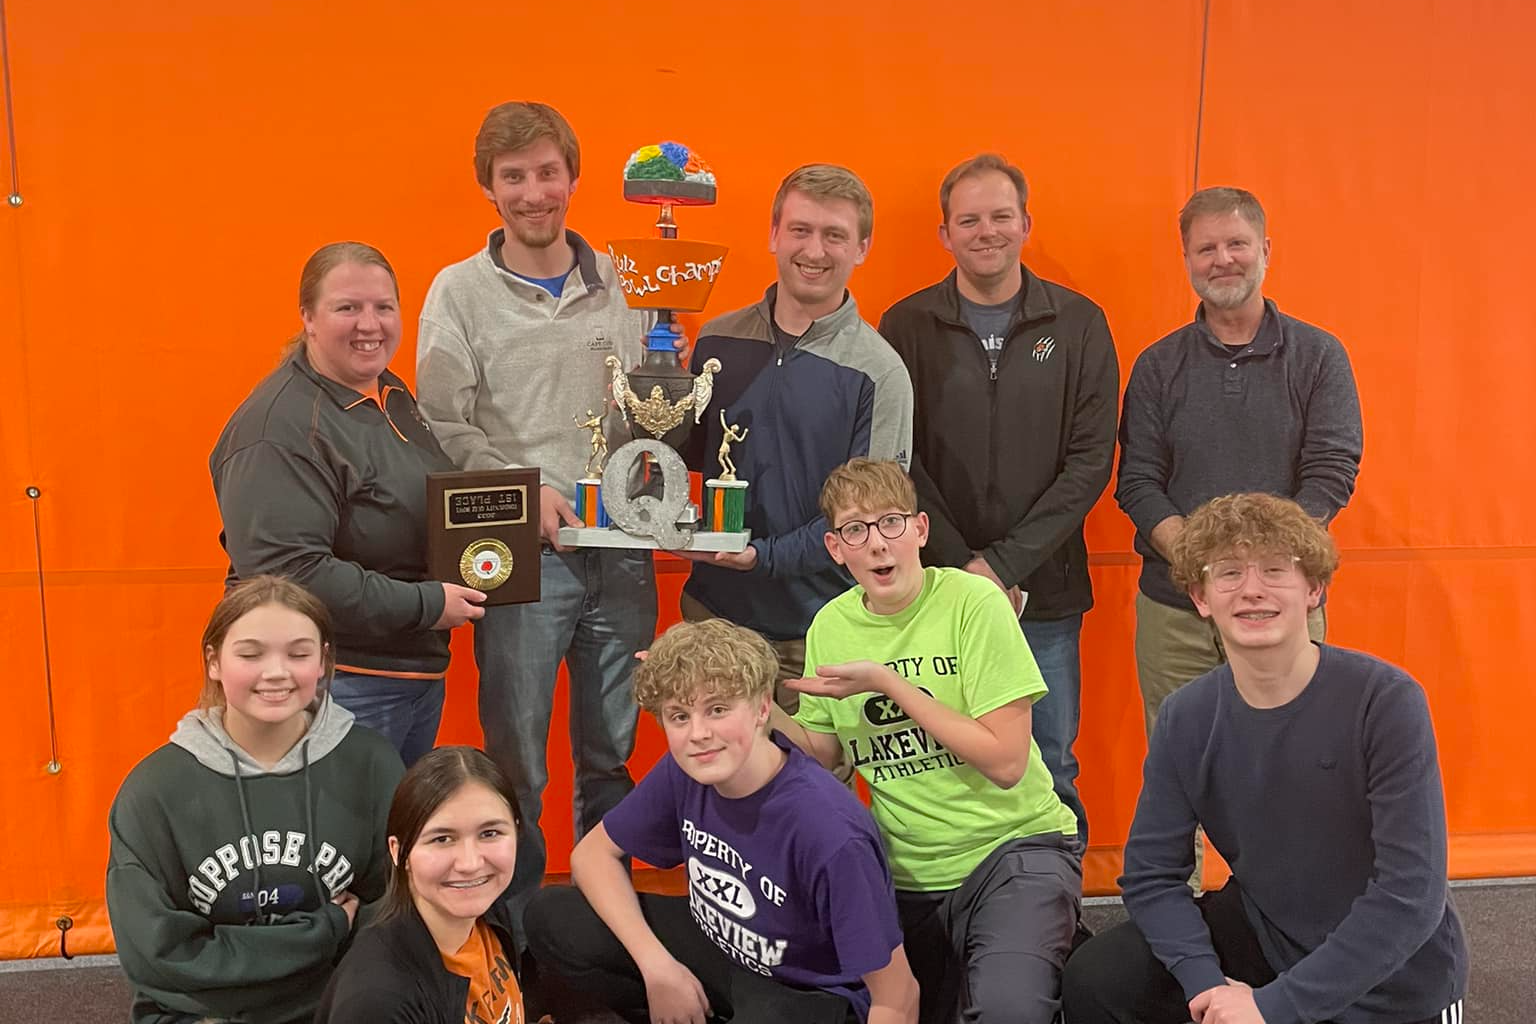 Quiz bowl team posing with their trophy against an orange background